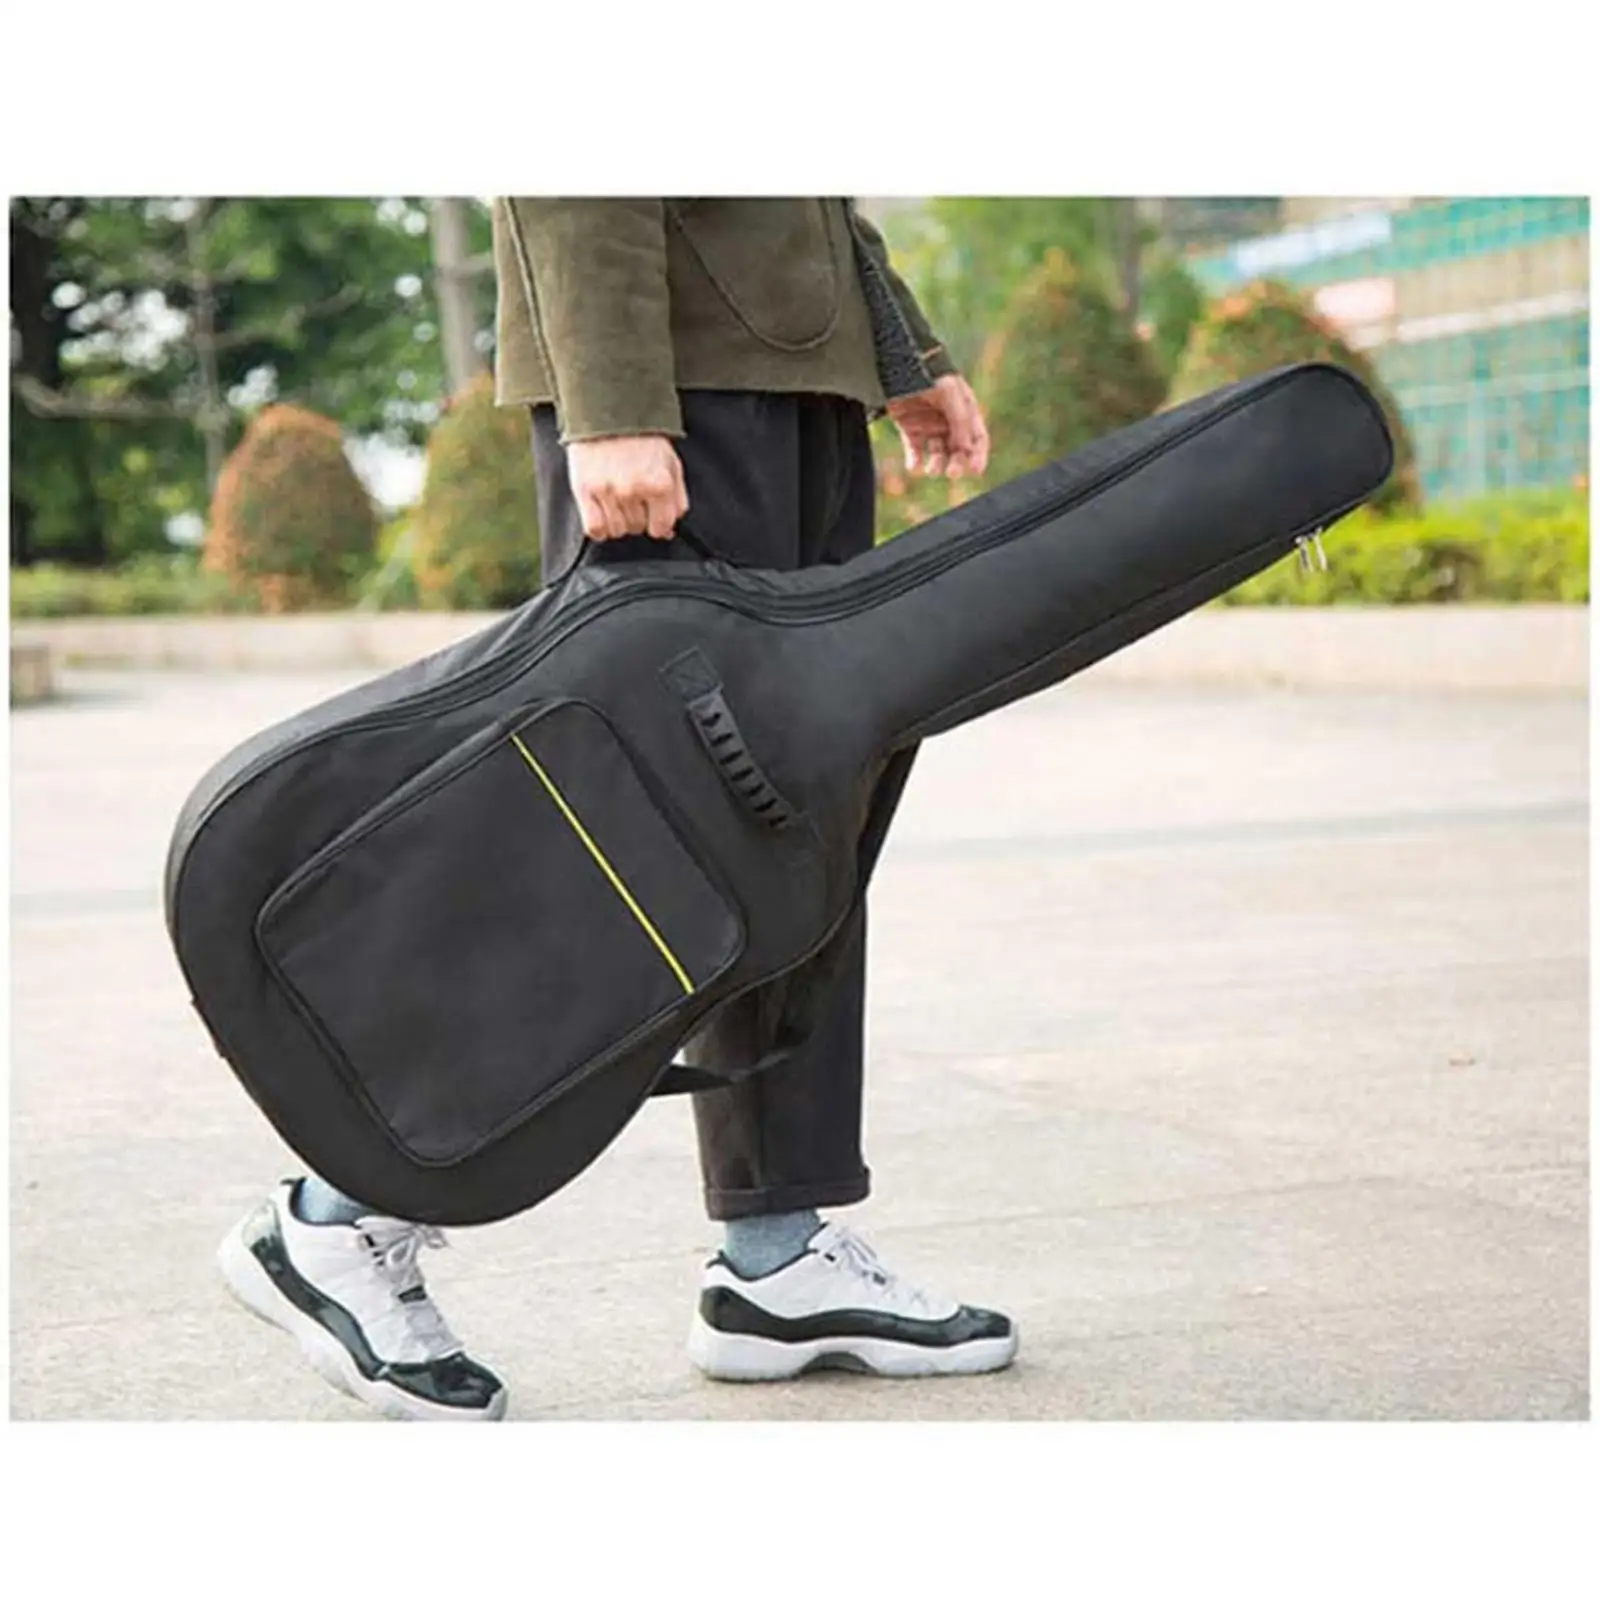 39 Inch Acoustic Guitar bag Padding Thick Waterproof Oxford Fabric Guitar Carry Case for storage Adjustable Straps Black